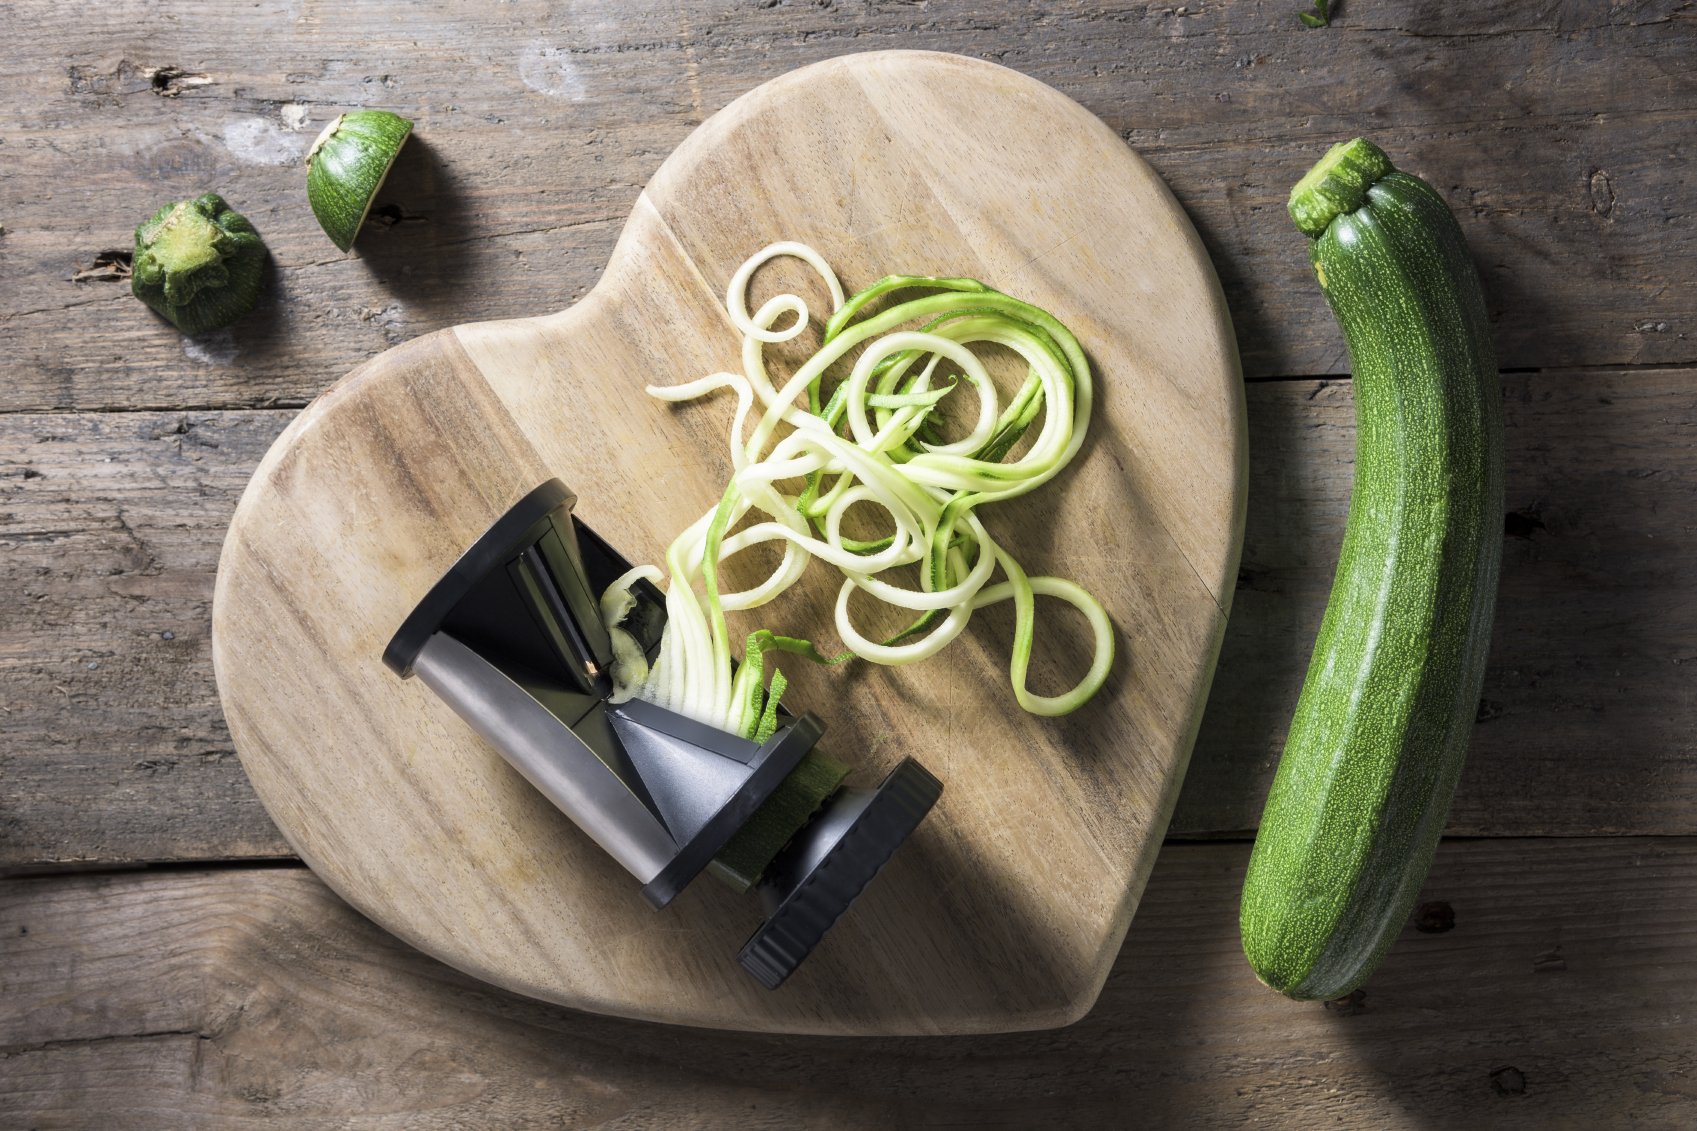 Freshly spiralised courgette twisting out of a spiraliser onto a heart shaped wooden chopping board. The courgette has been turned into long spaghetti shaped pieces, which look like noodles. A large green courgette is lying beside the chopping board with the top and tail of the courgette that has been used.